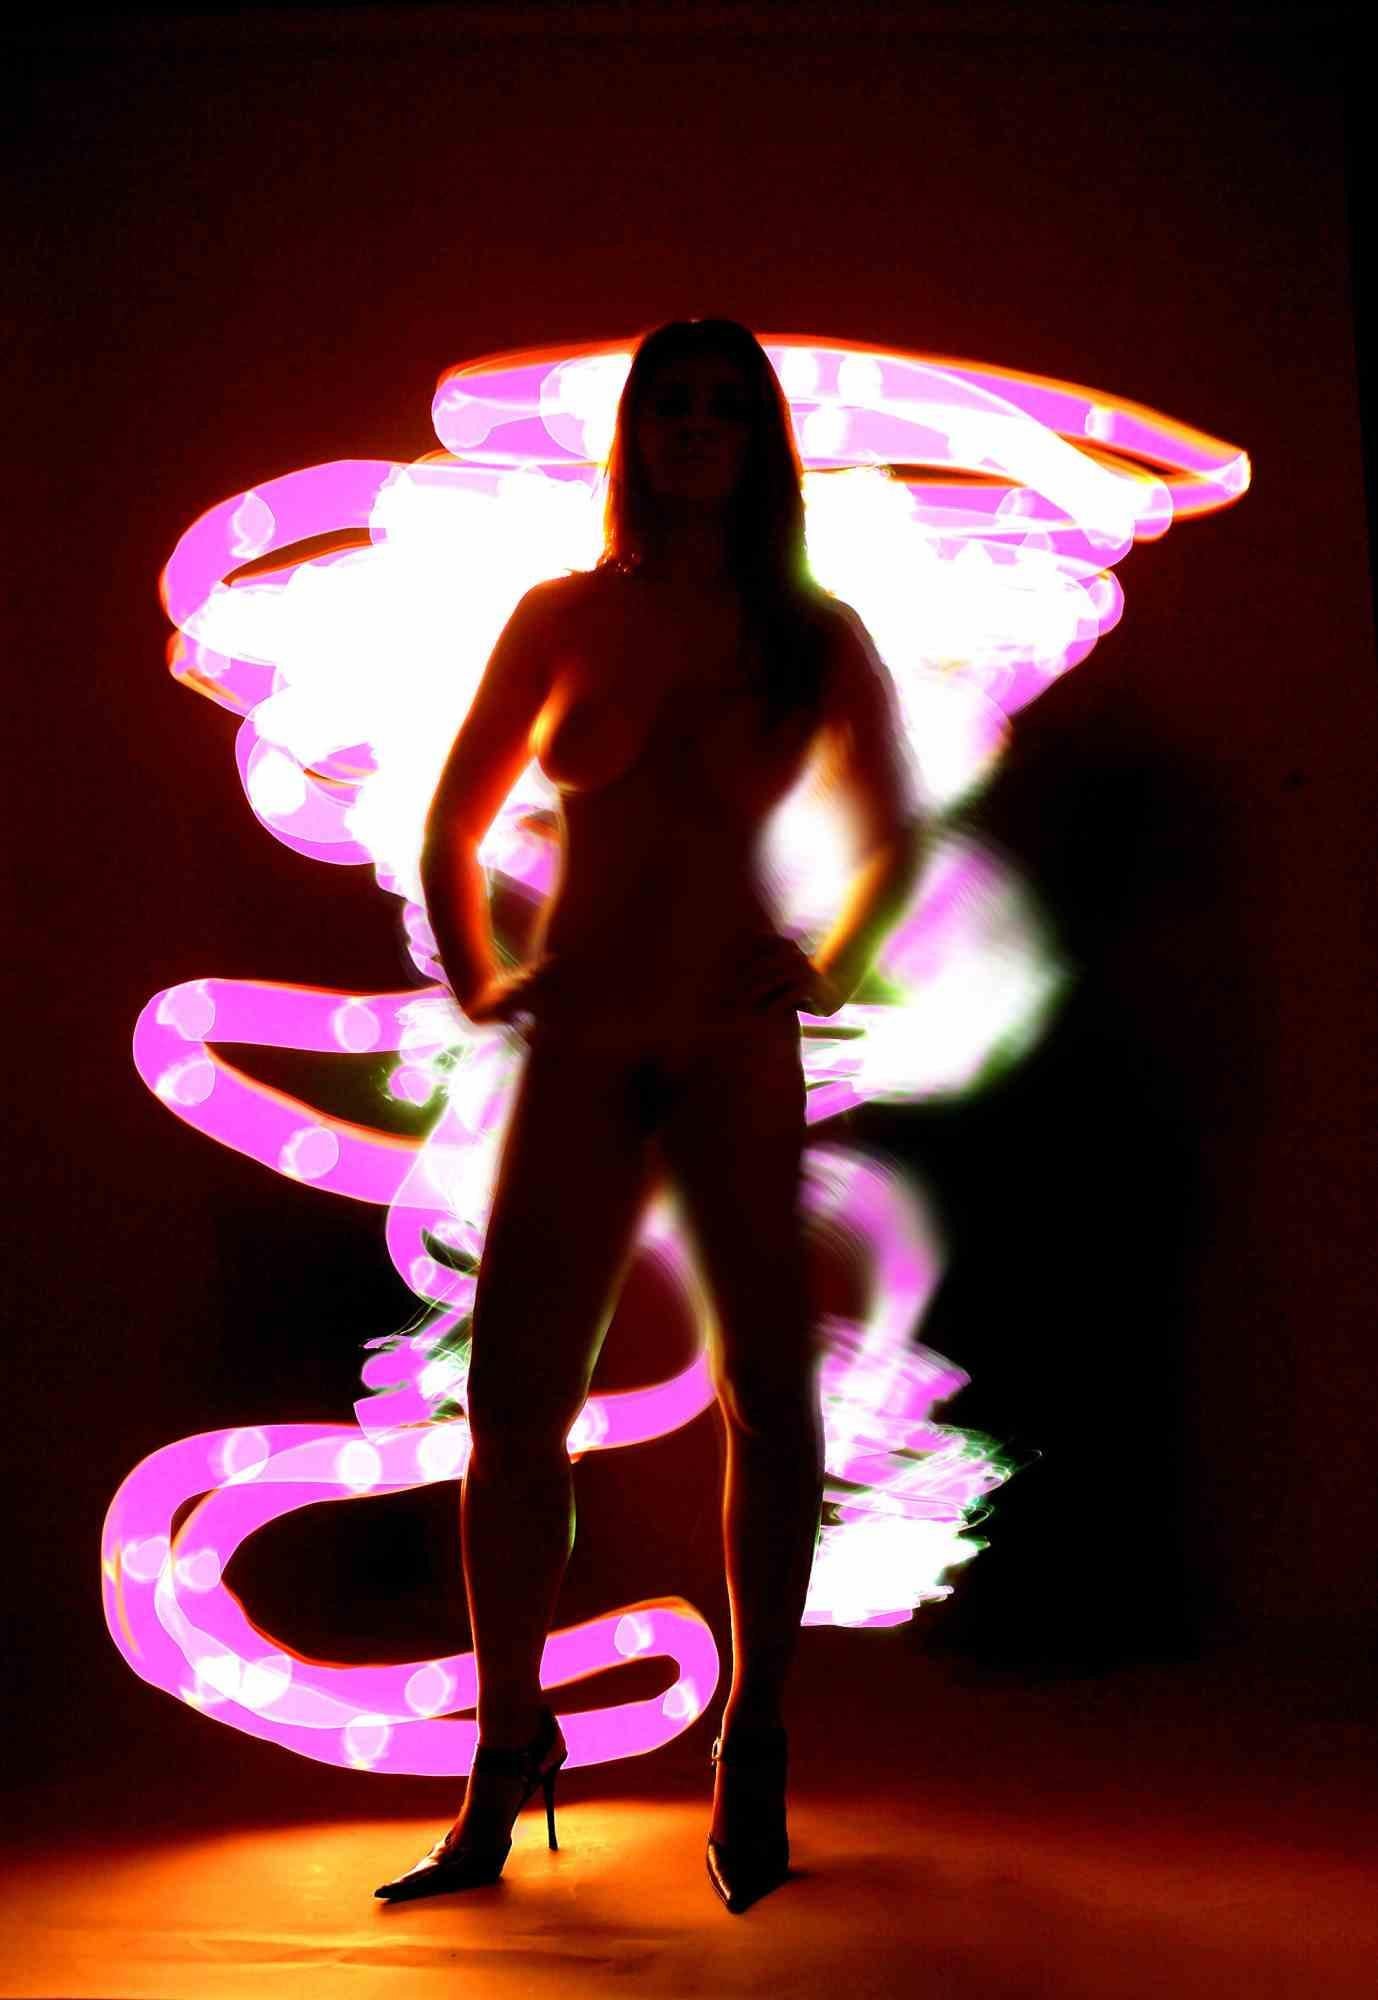 Light painting technique, realized in a completly dark photographic studio, where the photographer manually "paint" by torch  with light of different colours, the subjects and the background. Digital camera, chemical print.

Exhibitions:
Solo